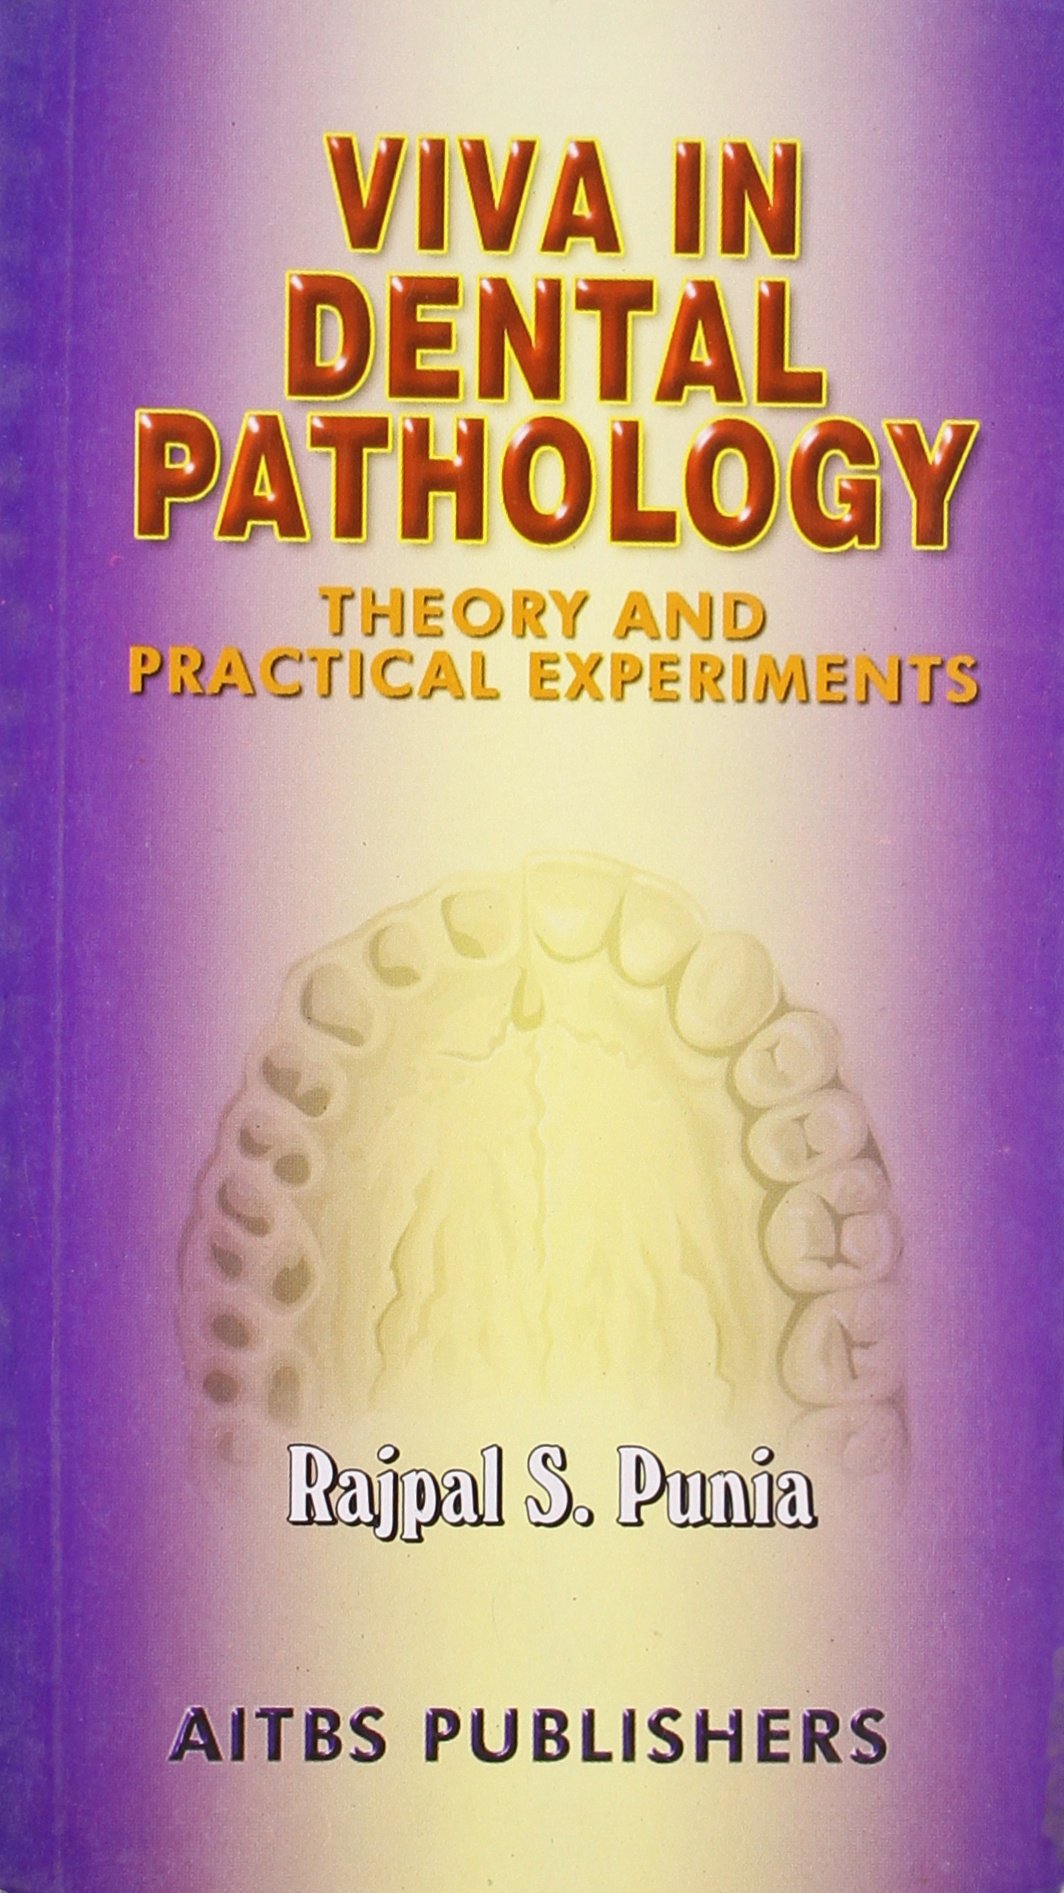 Viva in Dental Pathology-Theory and Practical Experiments